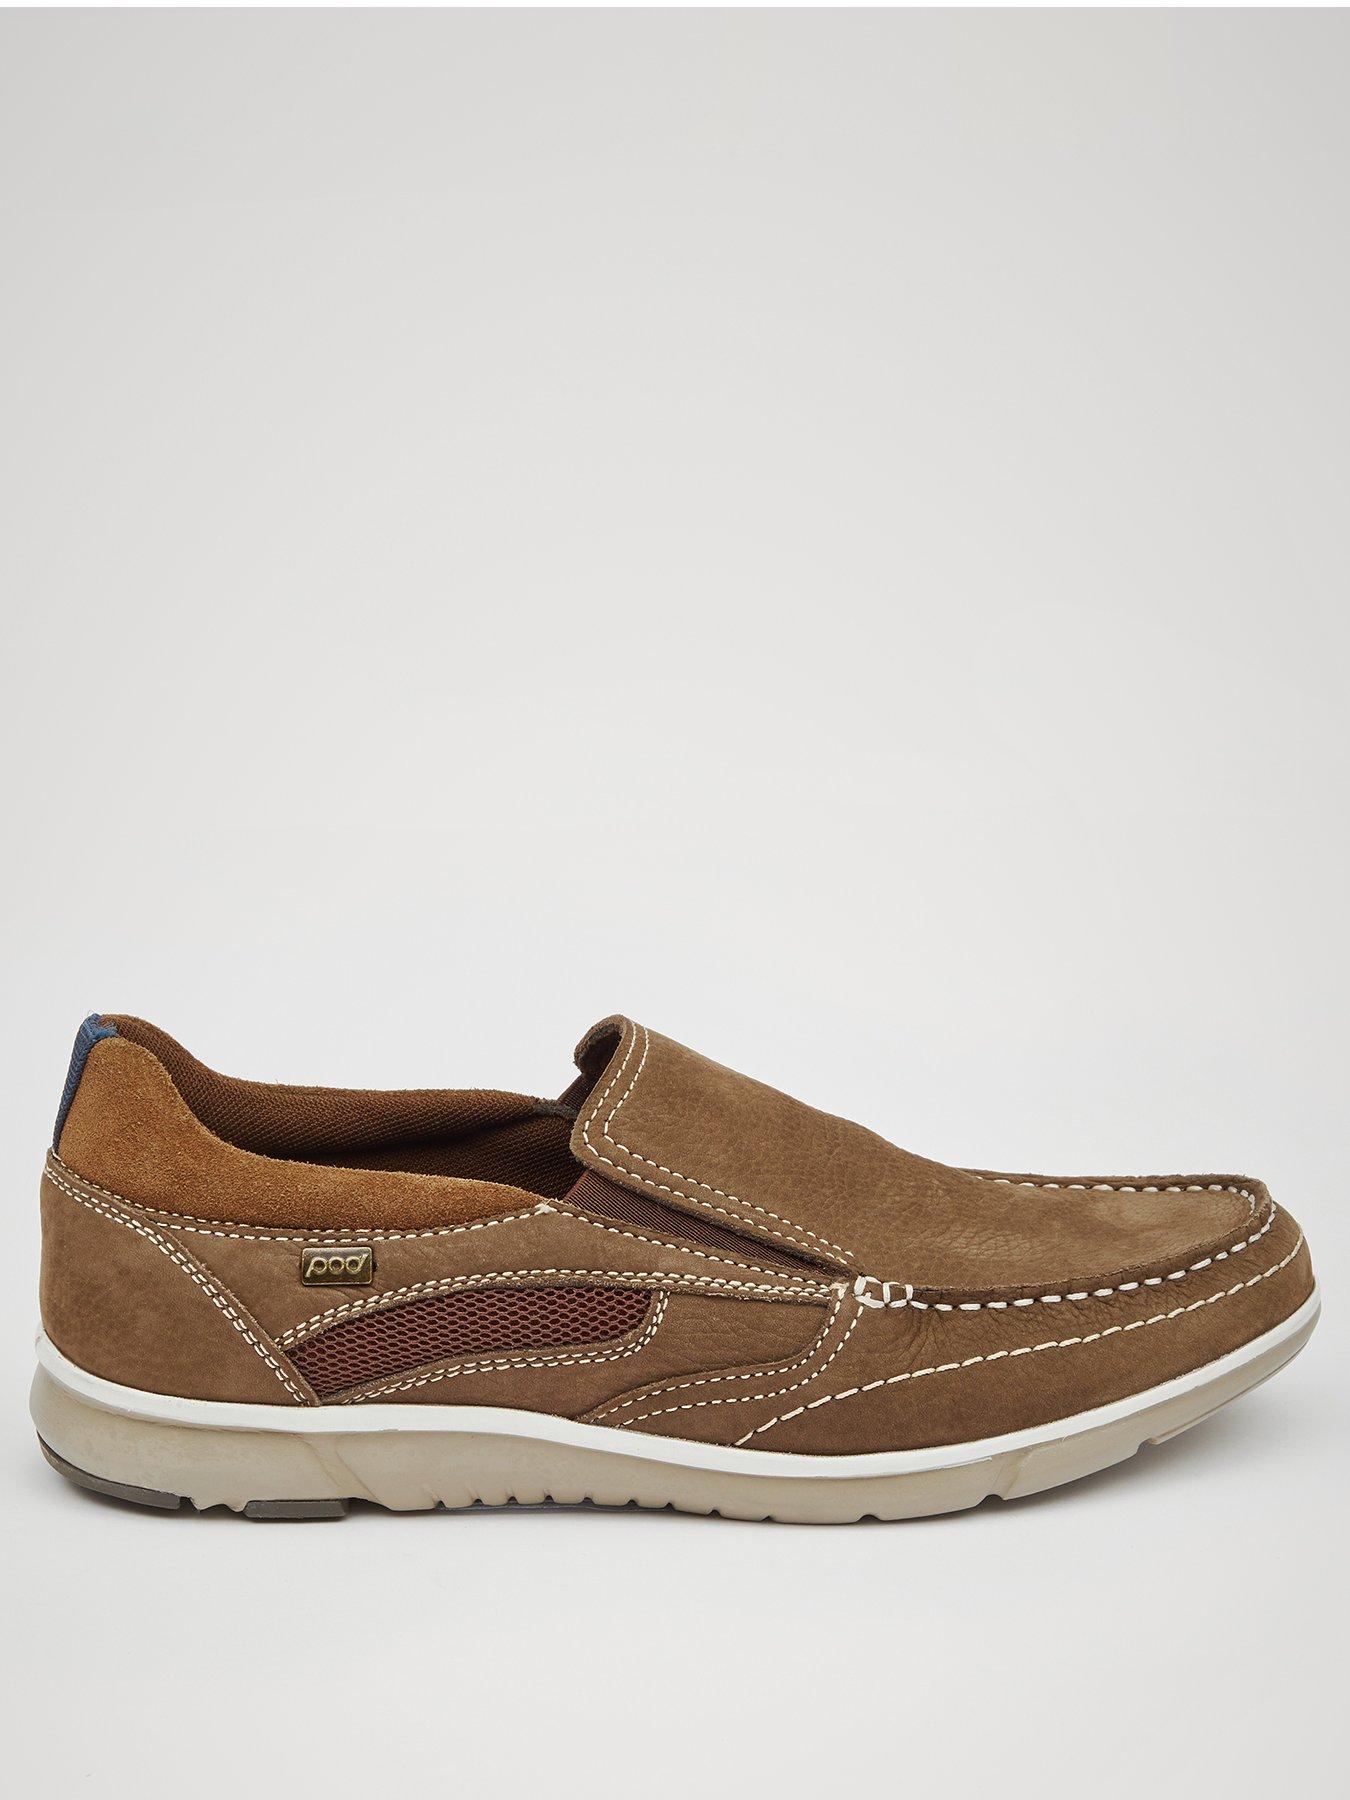 Shoes & boots Track Slip On Shoe - Brown